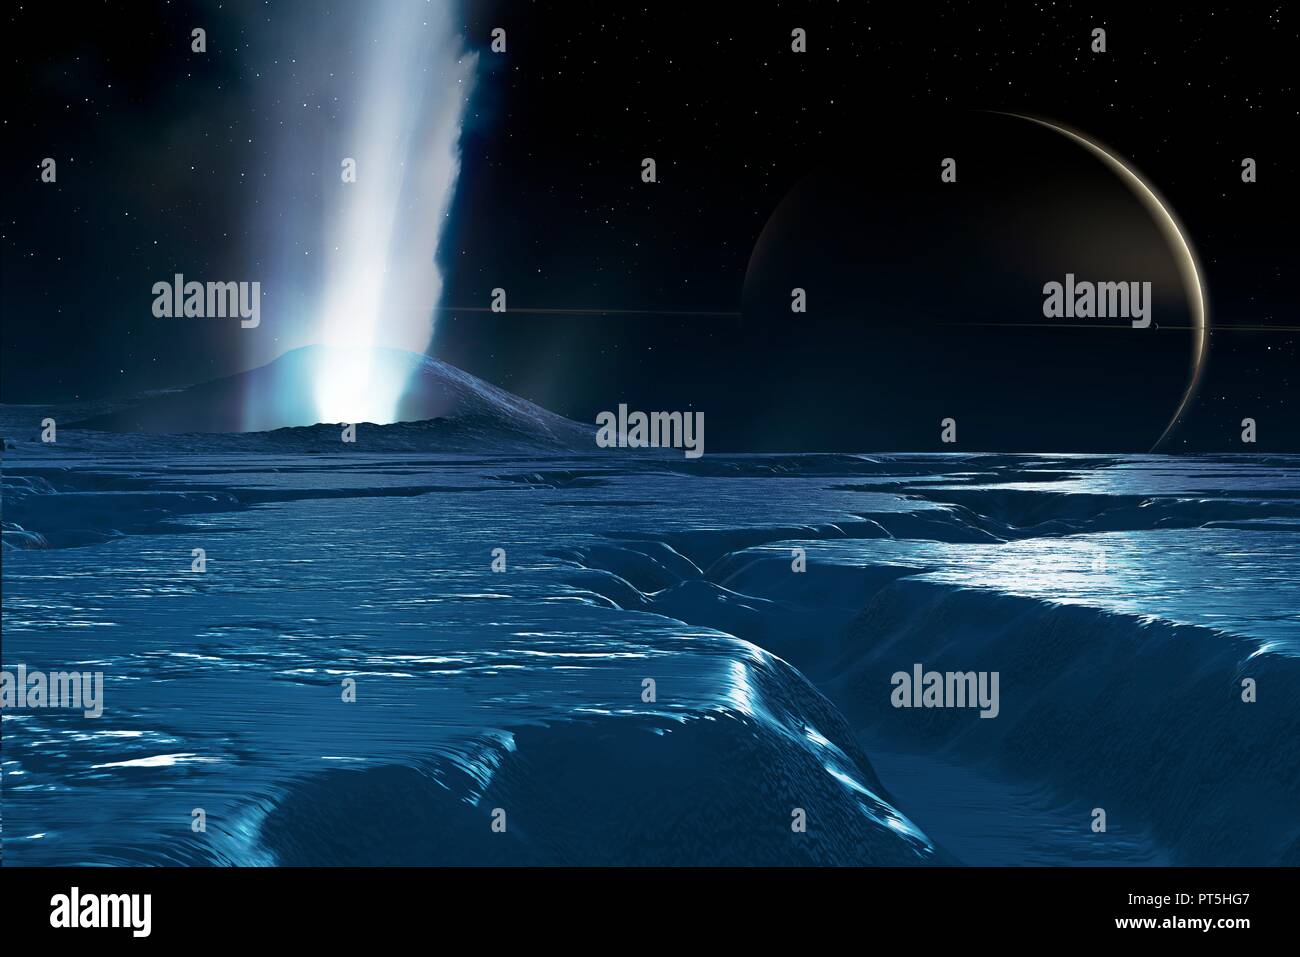 Water plumes on Enceladus, illustration. Enceladus is a mid-sized satellite of Saturn, about 500 km across, known since 1789. It is only one-tenth the size of the largest Saturnian moon, Titan. In 2005, the Cassini spacecraft discovered that this relatively small world is, surprisingly, geologically active. Geyser-like jets of water were seen venting from the moon's south-polar surface ices, vented by a process called cryovolcanism ('cold volcanism'). Another satellite, Mimas, is seen on Saturn's ring plane. Stock Photo